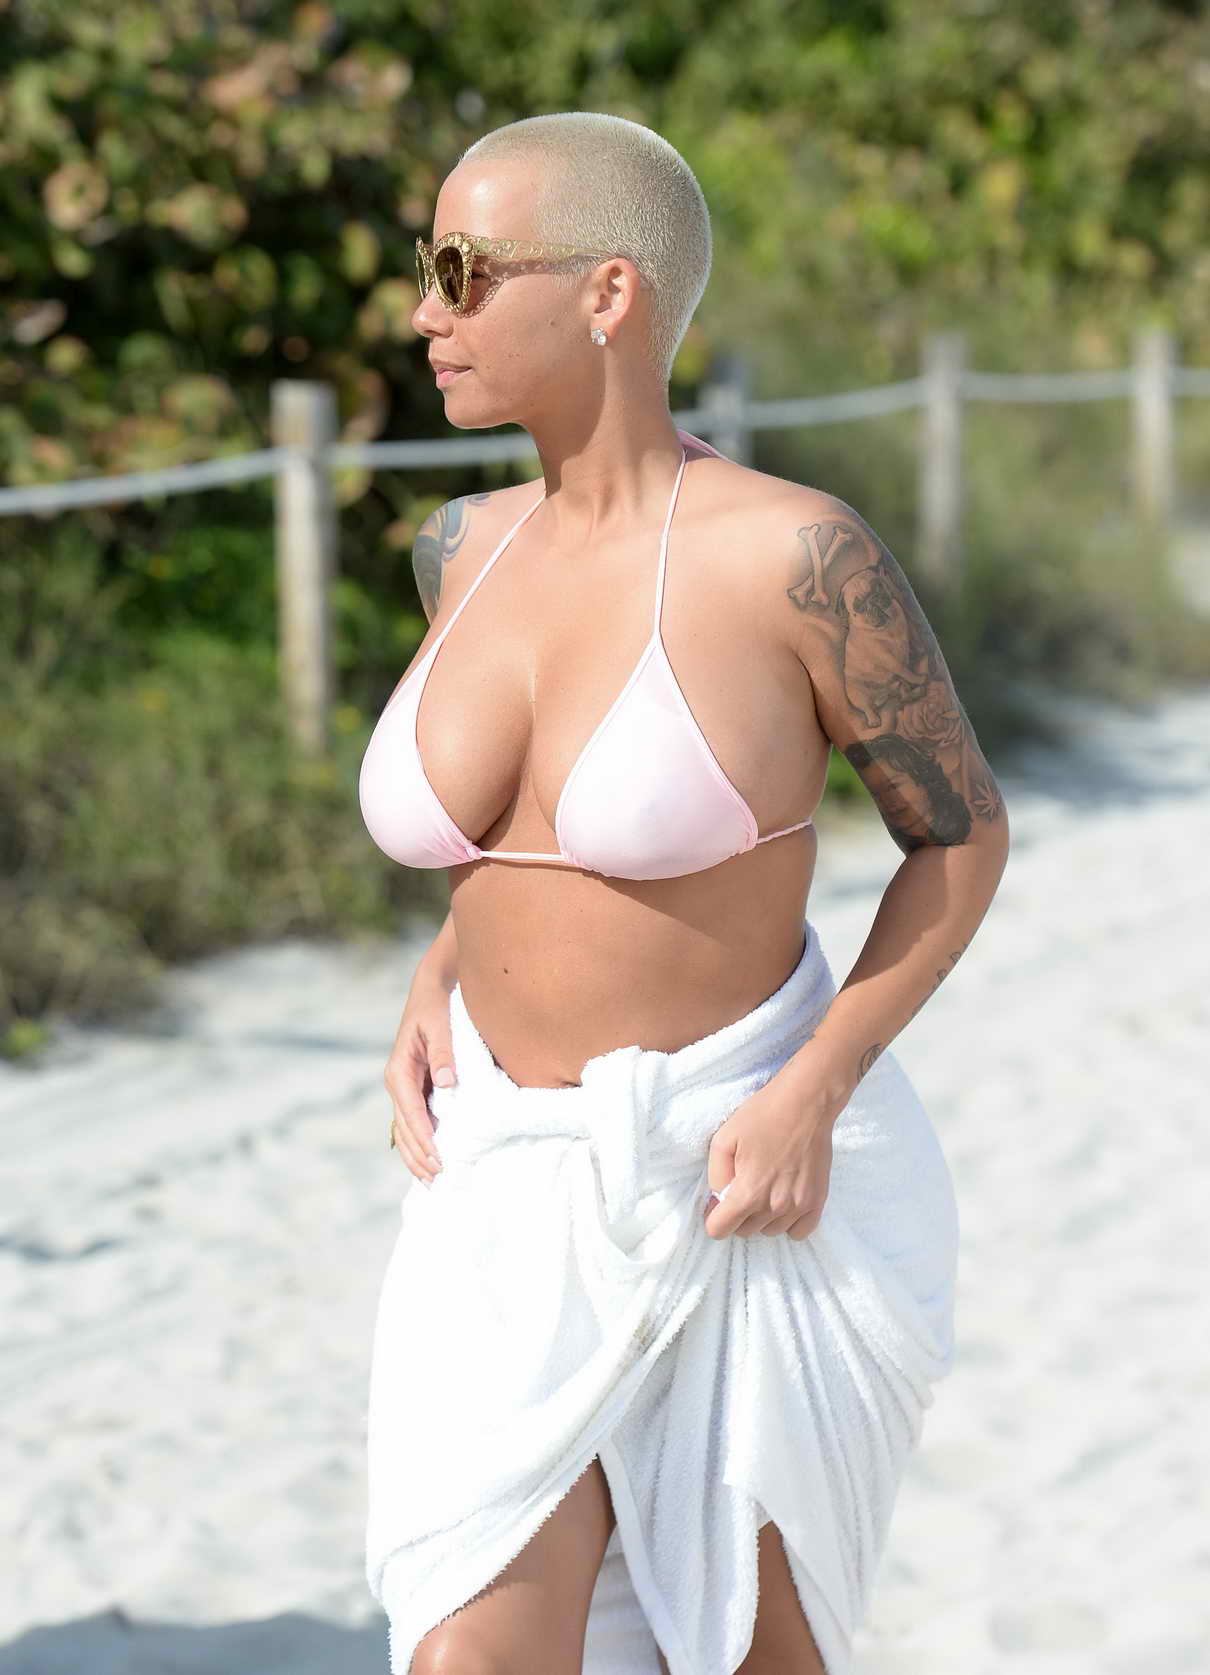 Amber rose at the beach